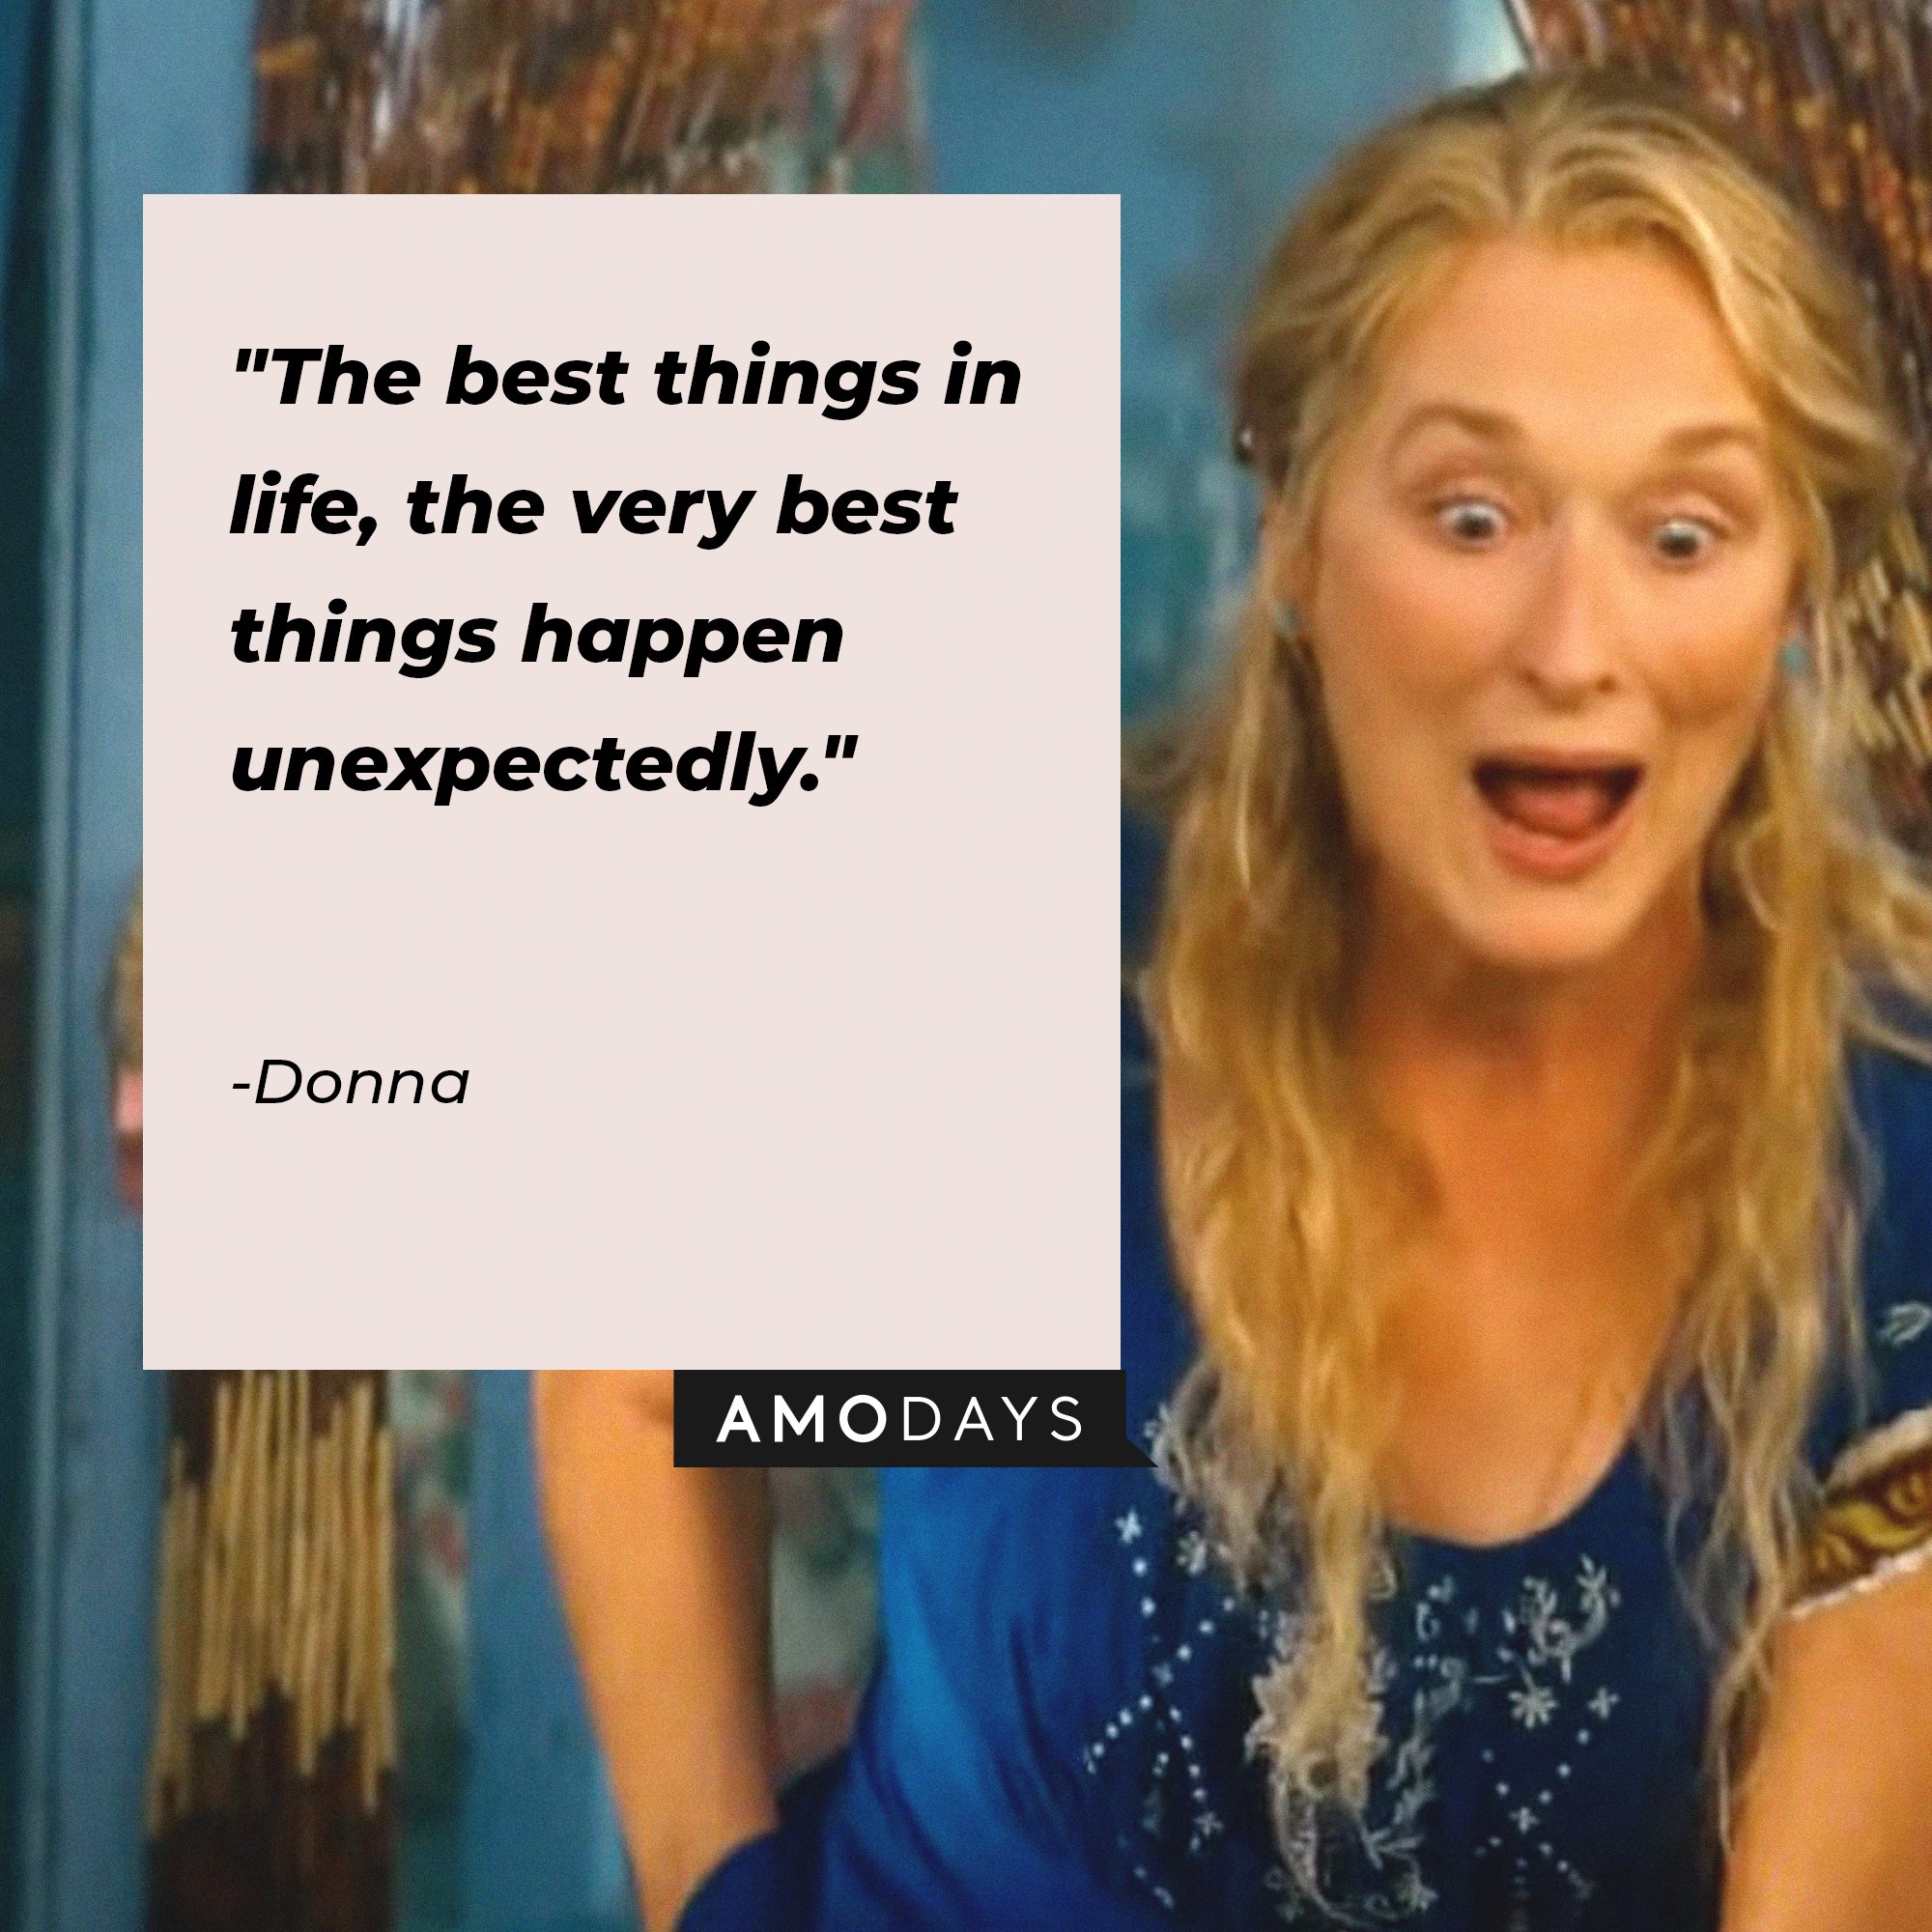 Donna's quote: "The best things in life, the very best things happen unexpectedly." | Image: AmoDays